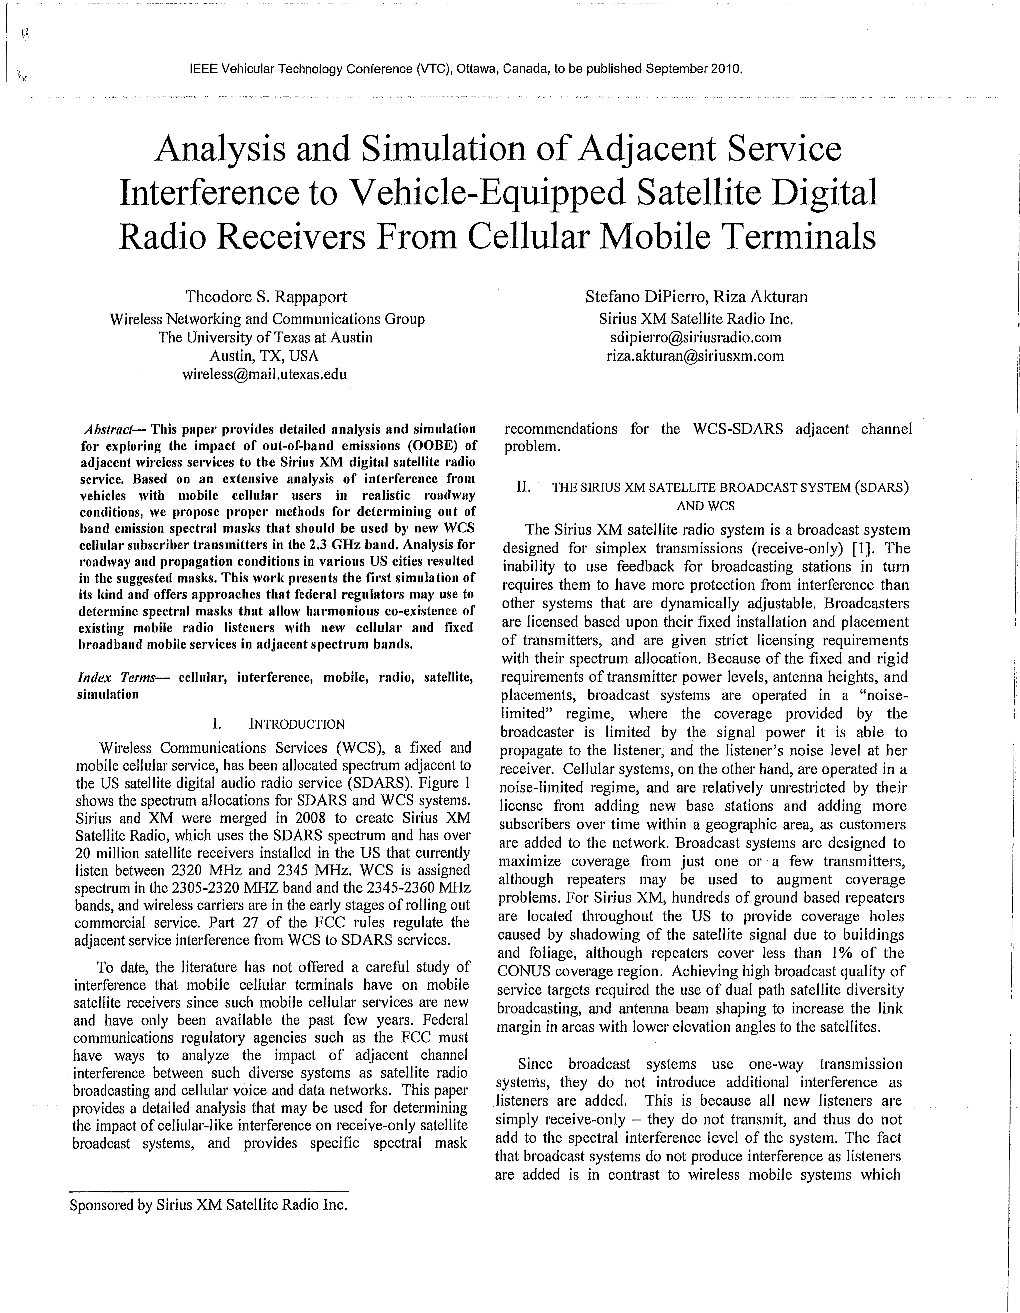 Analysis and Simulation of Adjacent Service Interference to Vehicle-Equipped Satellite Digital Radio Receivers from Cellular Mobile Terminals